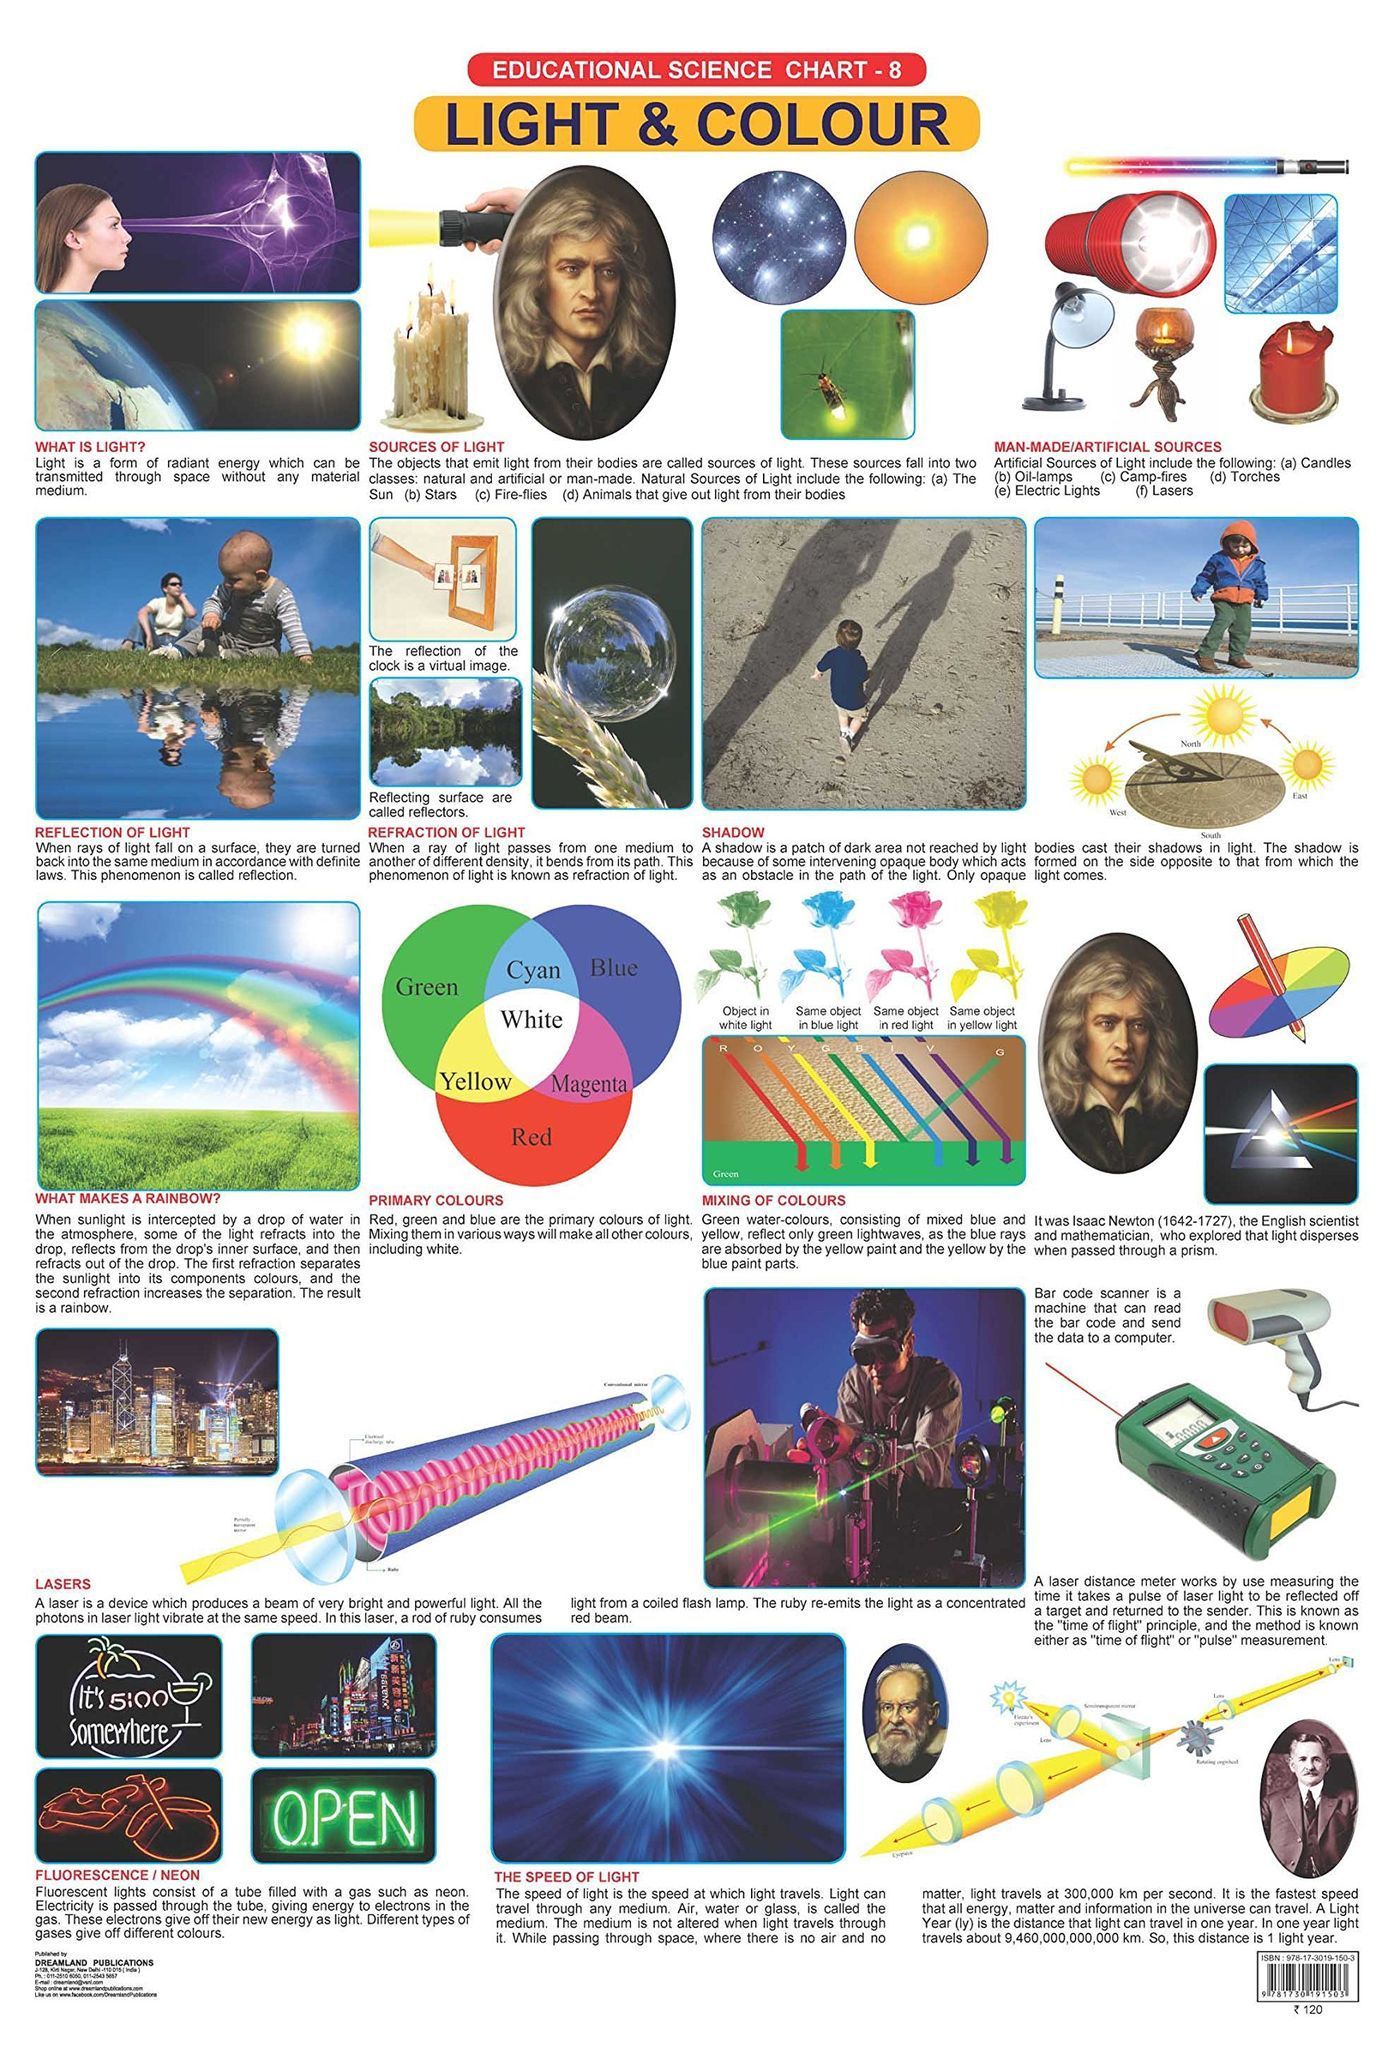 Light & Colour Wall Chart (Science Chart) - Both Side Hard Laminated (Size 48 x 73 cm) [Poster] Dreamland Publications